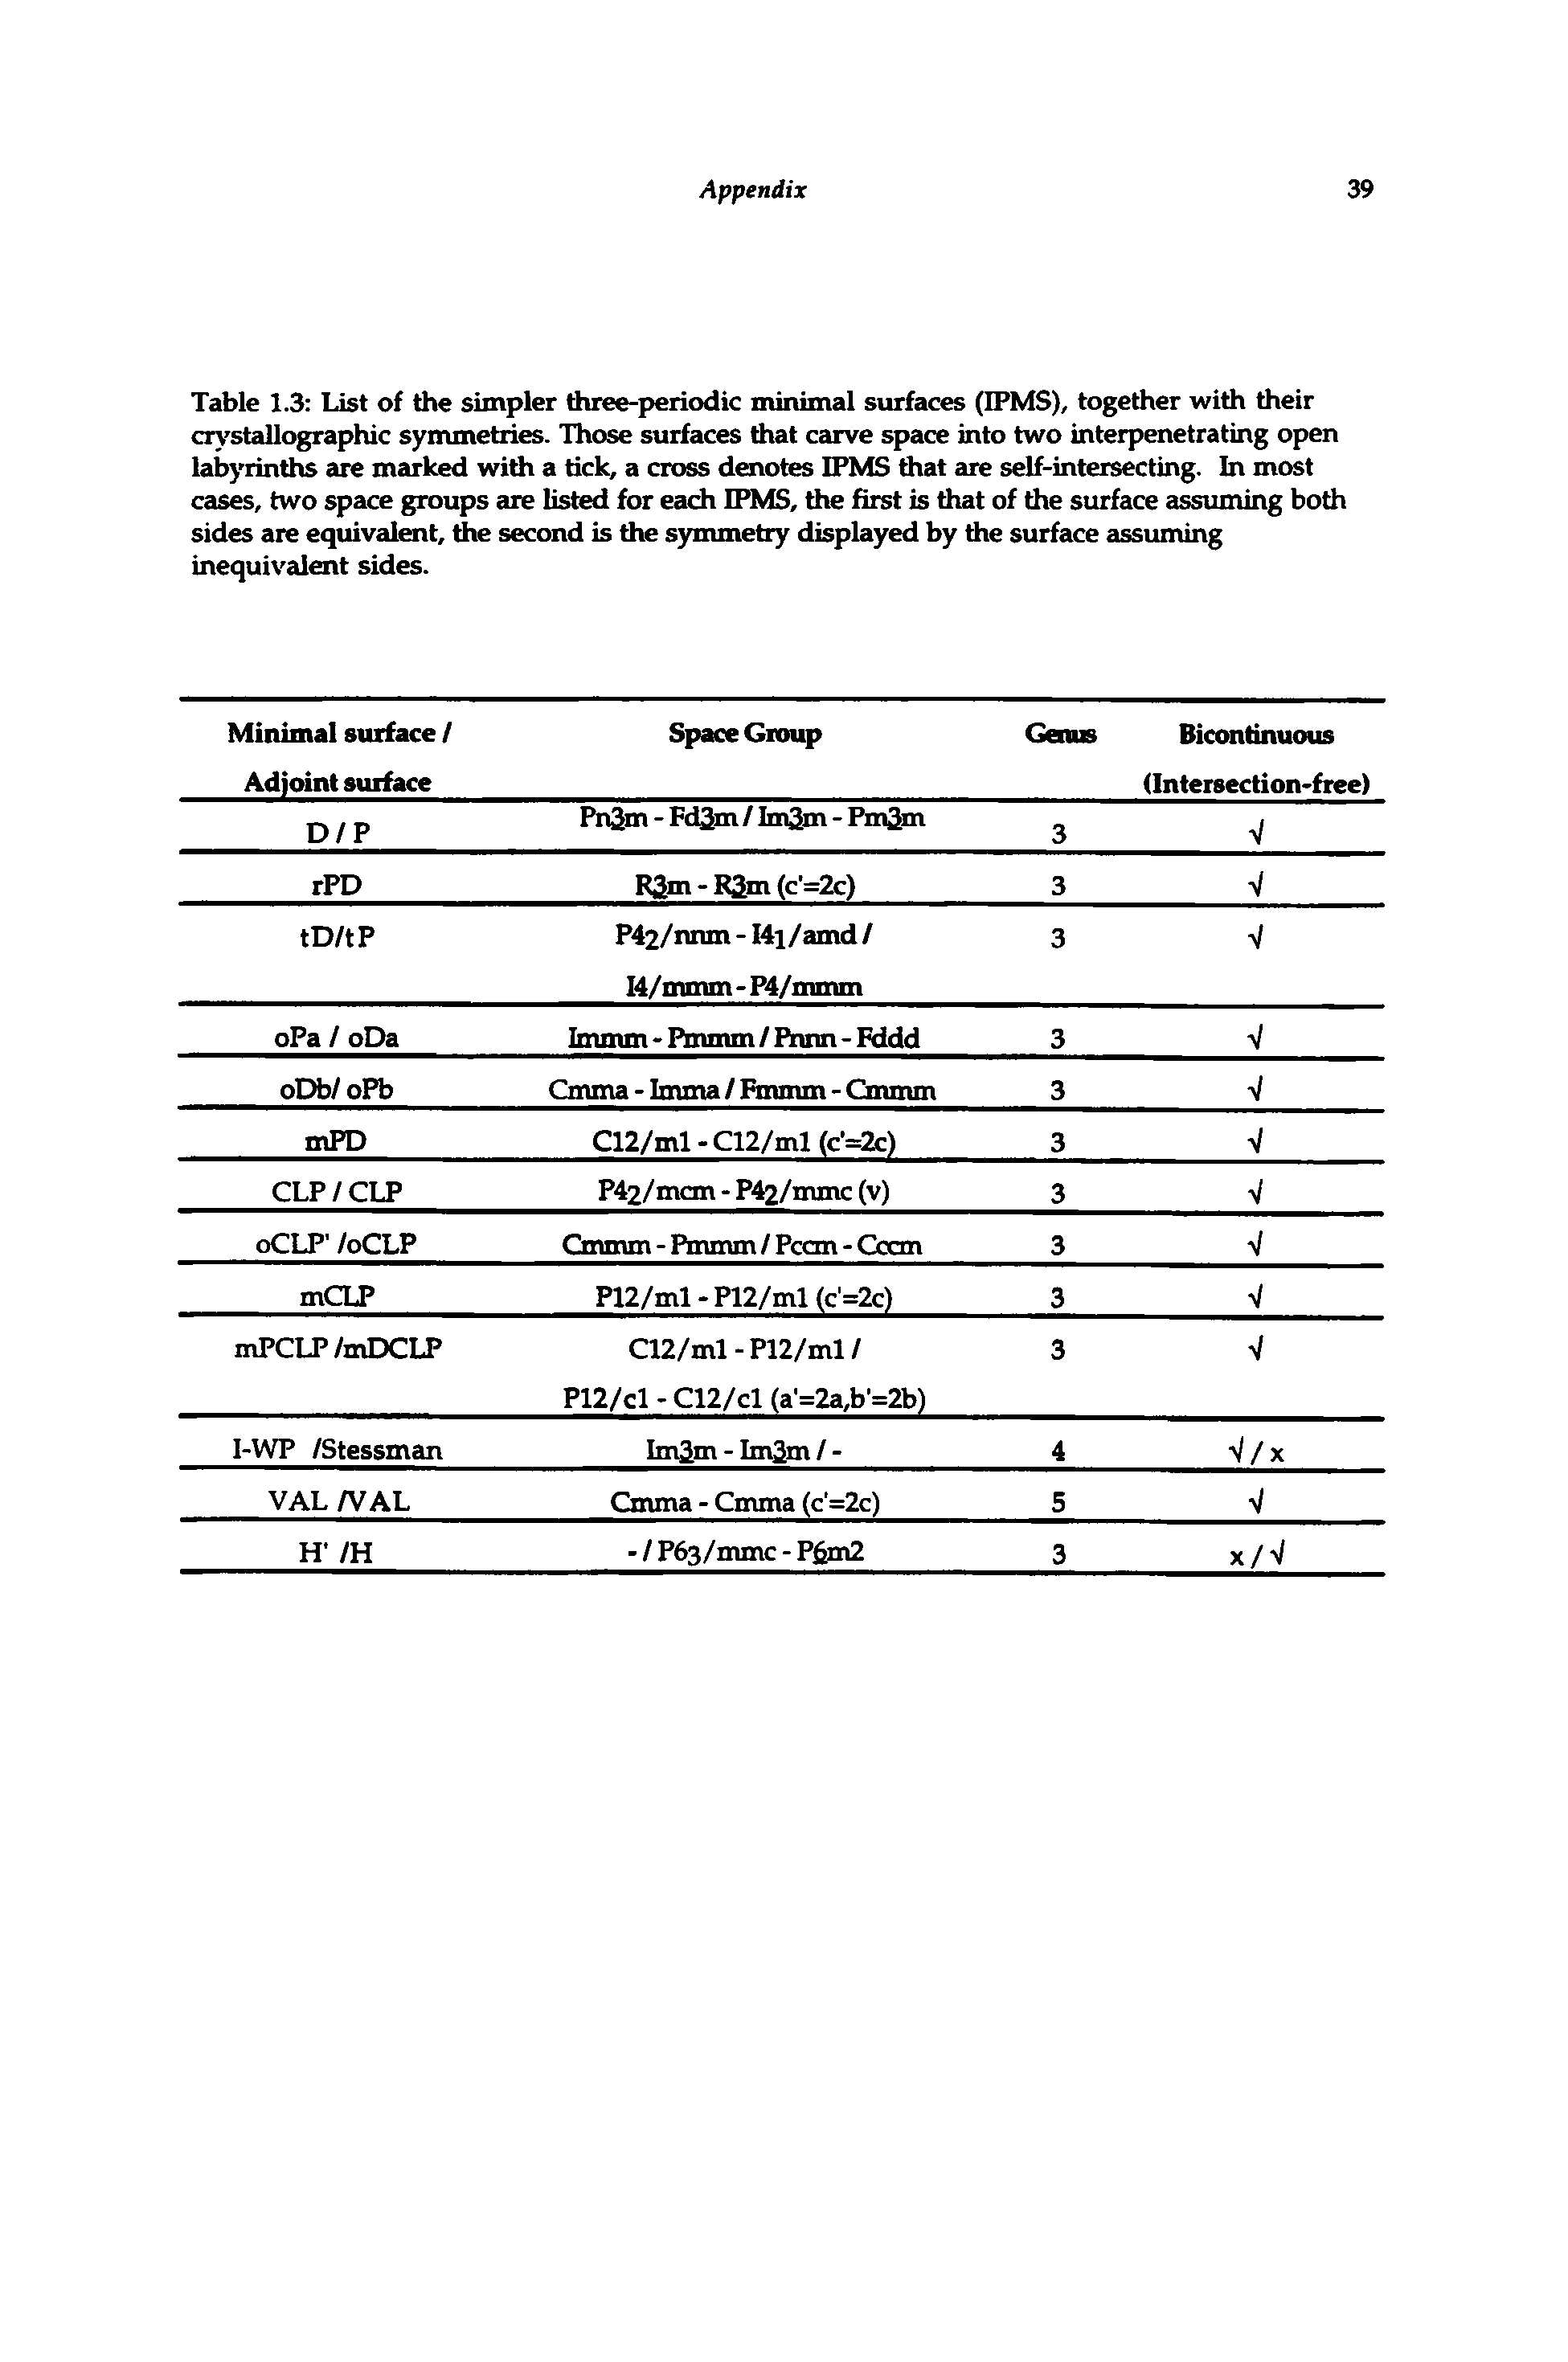 Table 1.3 List of the simpler three-periodic minimal surfaces (IPMS), together with their crystallographic symmetries. Those surfaces that carve space into two interpenetrating open labyrinths are marked with a tick, a cross denotes IFMS that are self-intersecting. In most cases, two space groups are listed for each IPMS, the first is that of the surface ctssuming both sides are equivalent, the second is the s)munetry displayed by the surface assuming inequivalent sides.